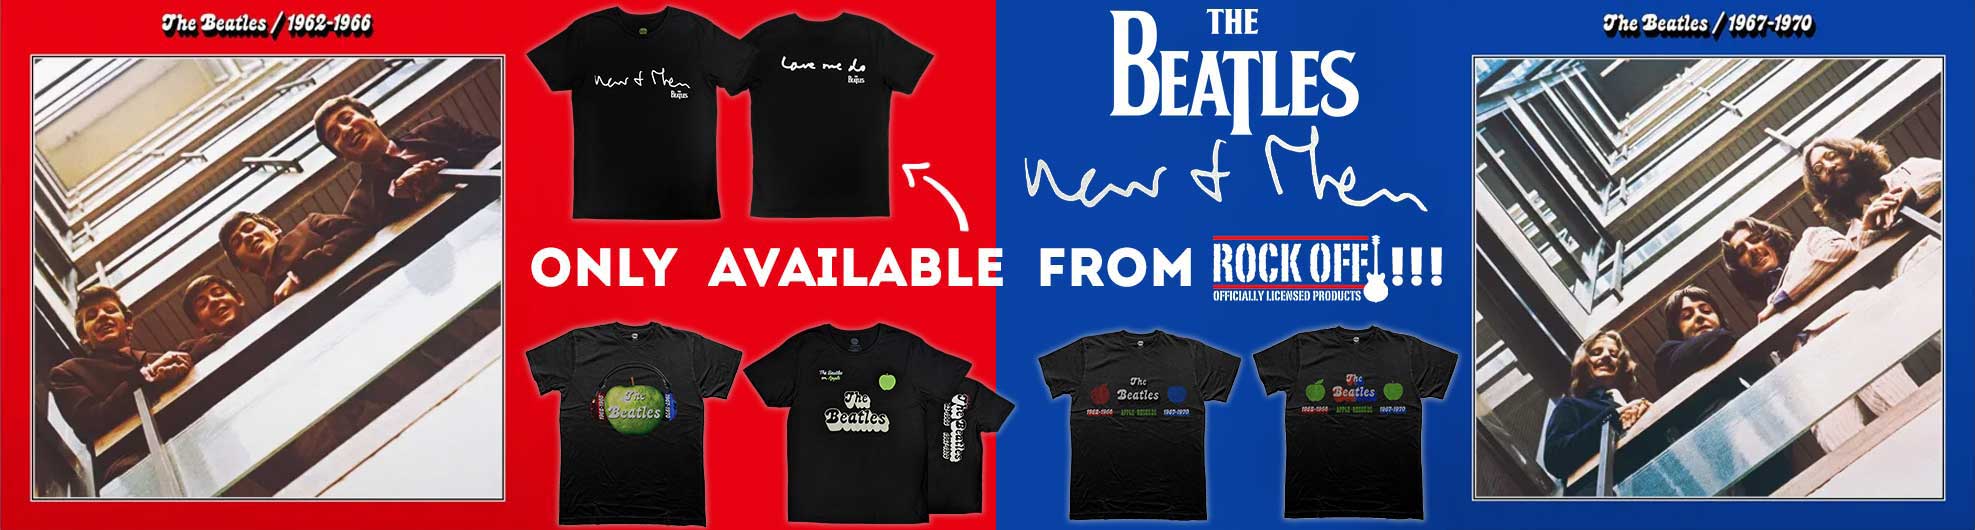 The Beatles Now and Then + Red and Blue official licensed merchandise